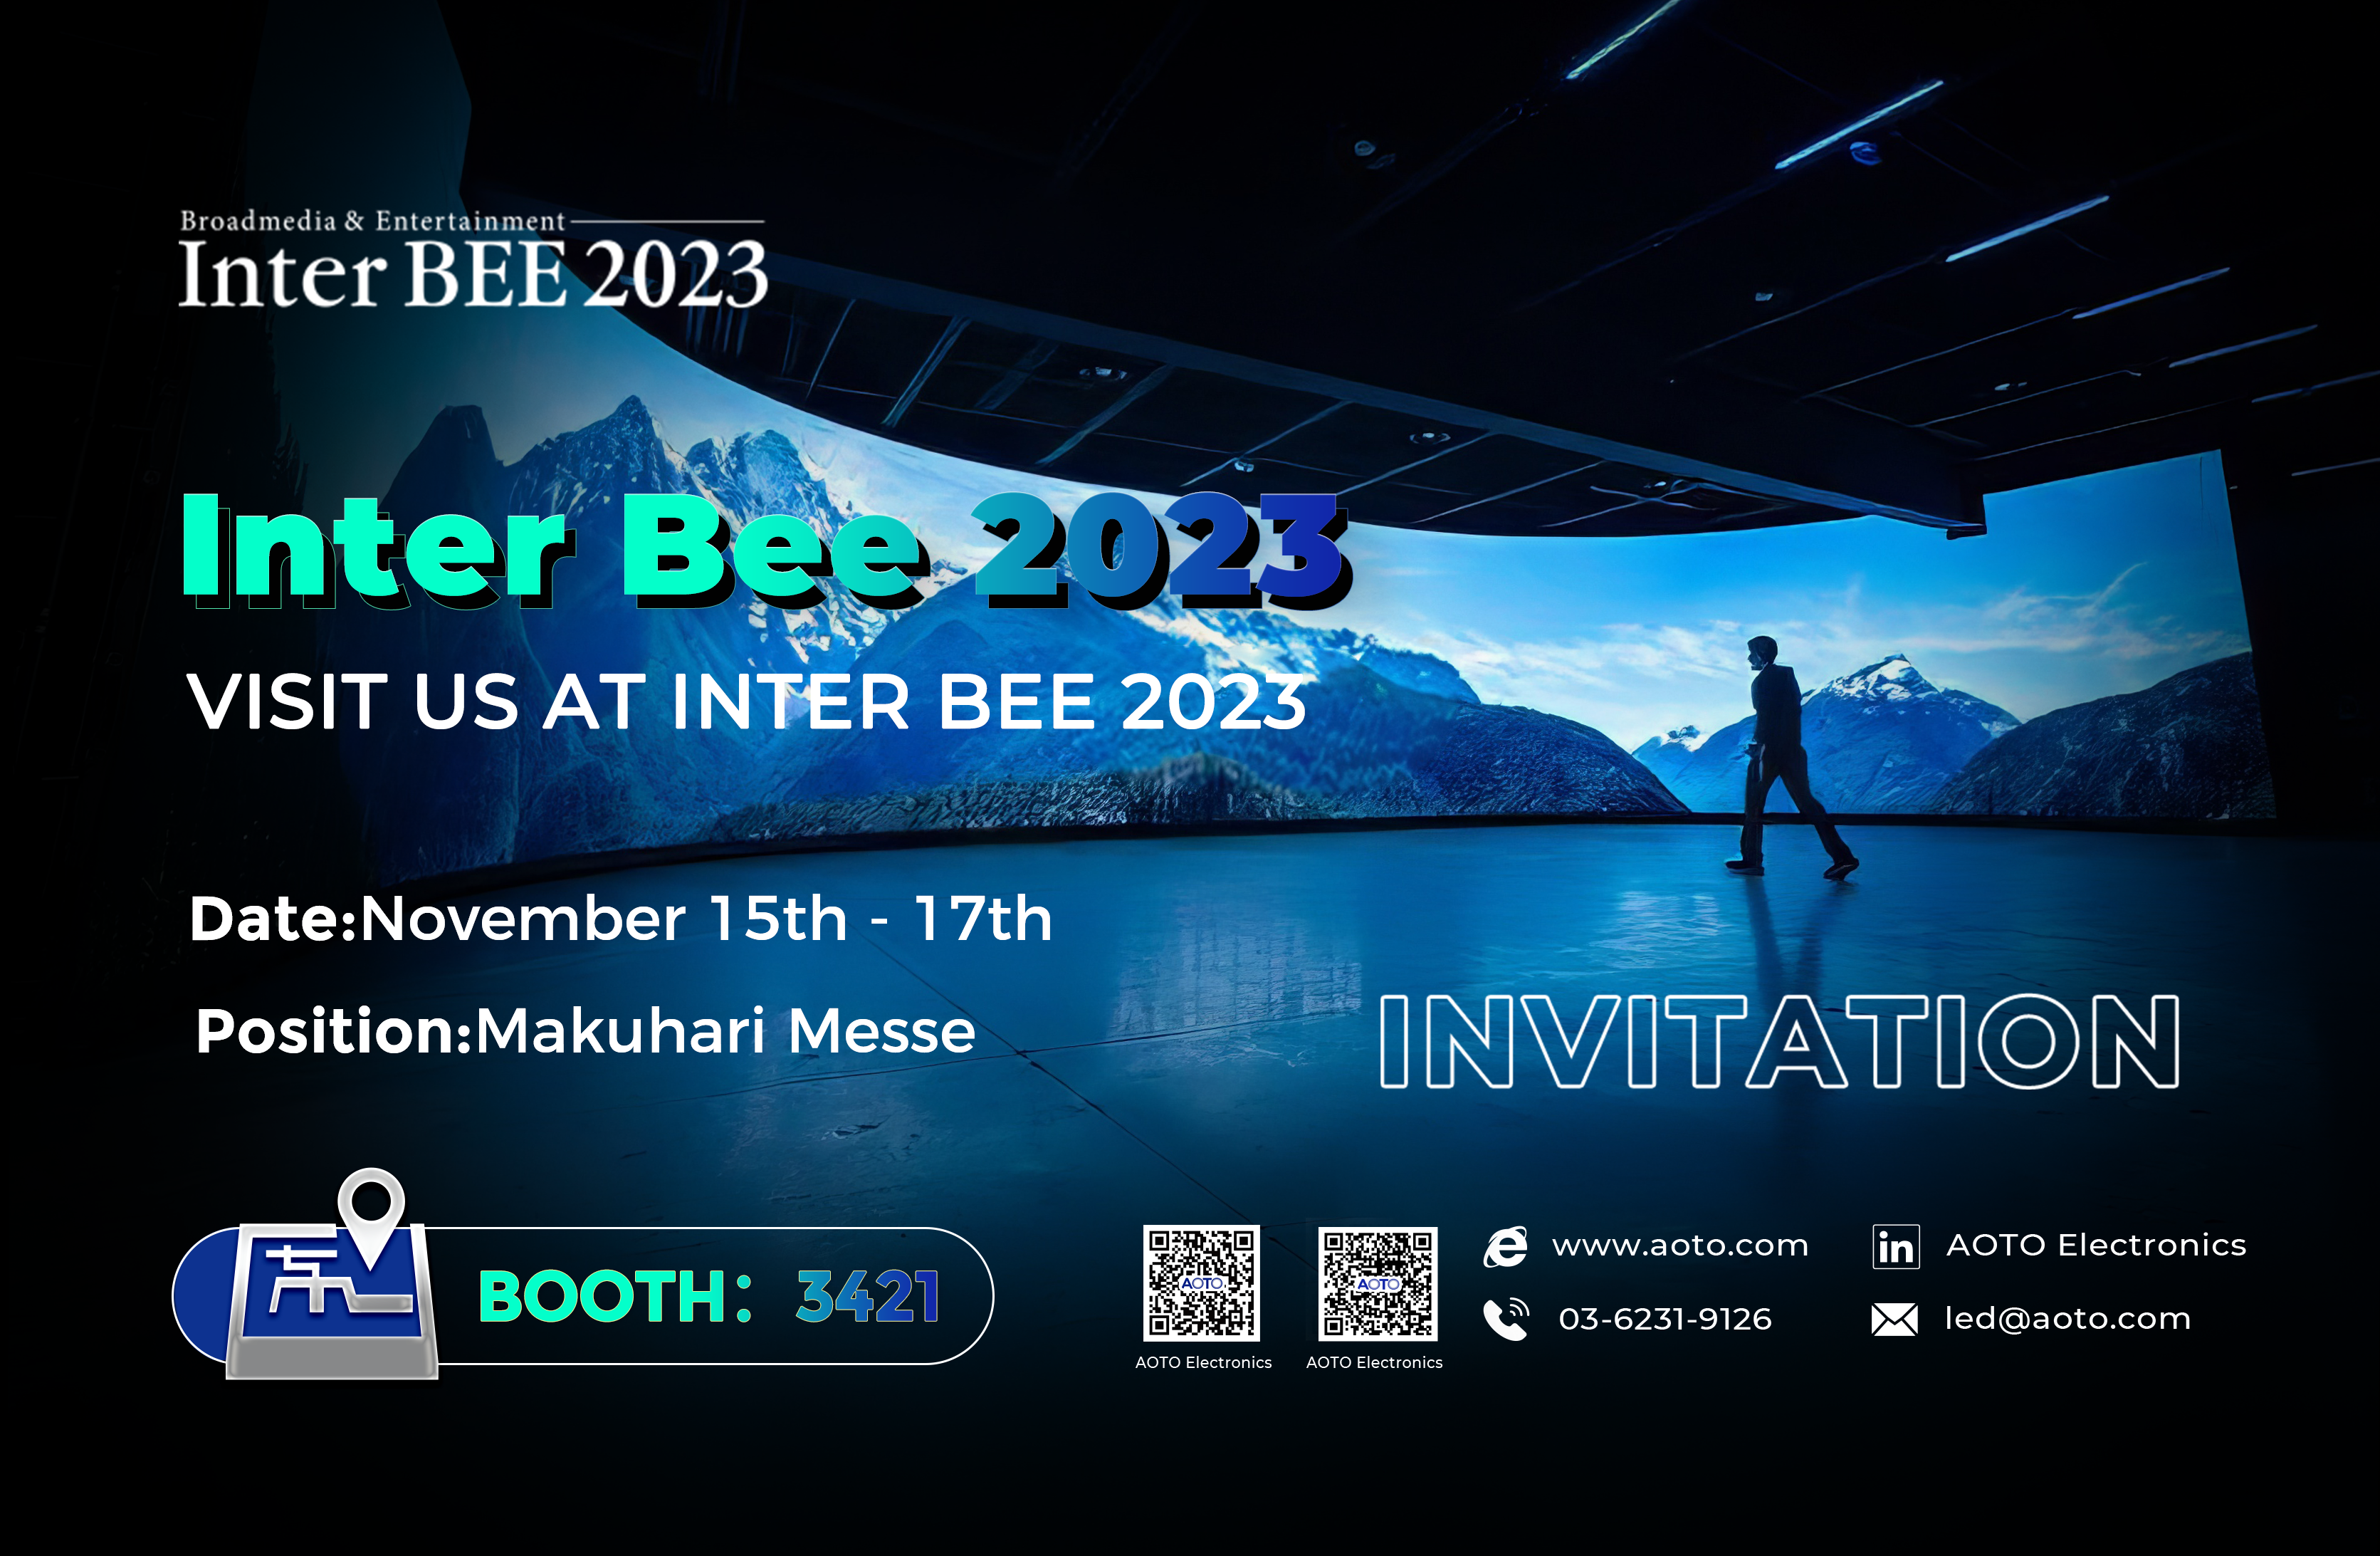 AOTO joins Toei Tokyo, Koto Electric Group, and many other industry giants at Inter Bee Japan 2023